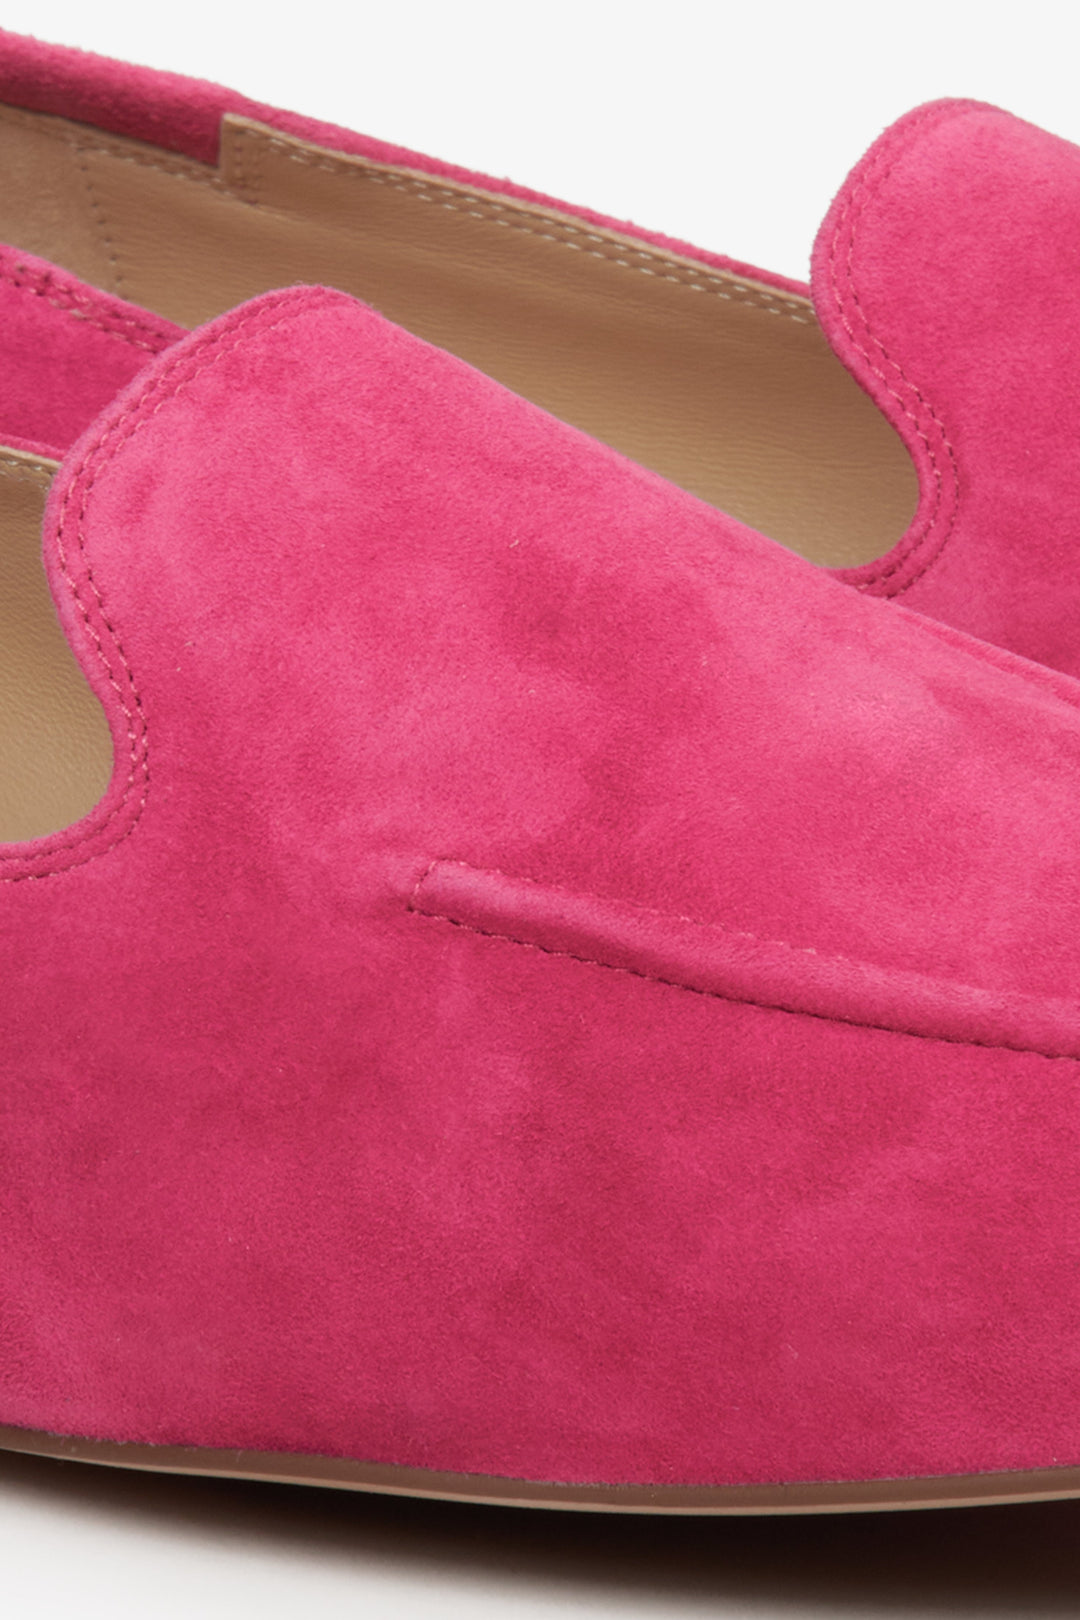 Women's Estro velour moccasins for fall in fuchsia - close-up on details.